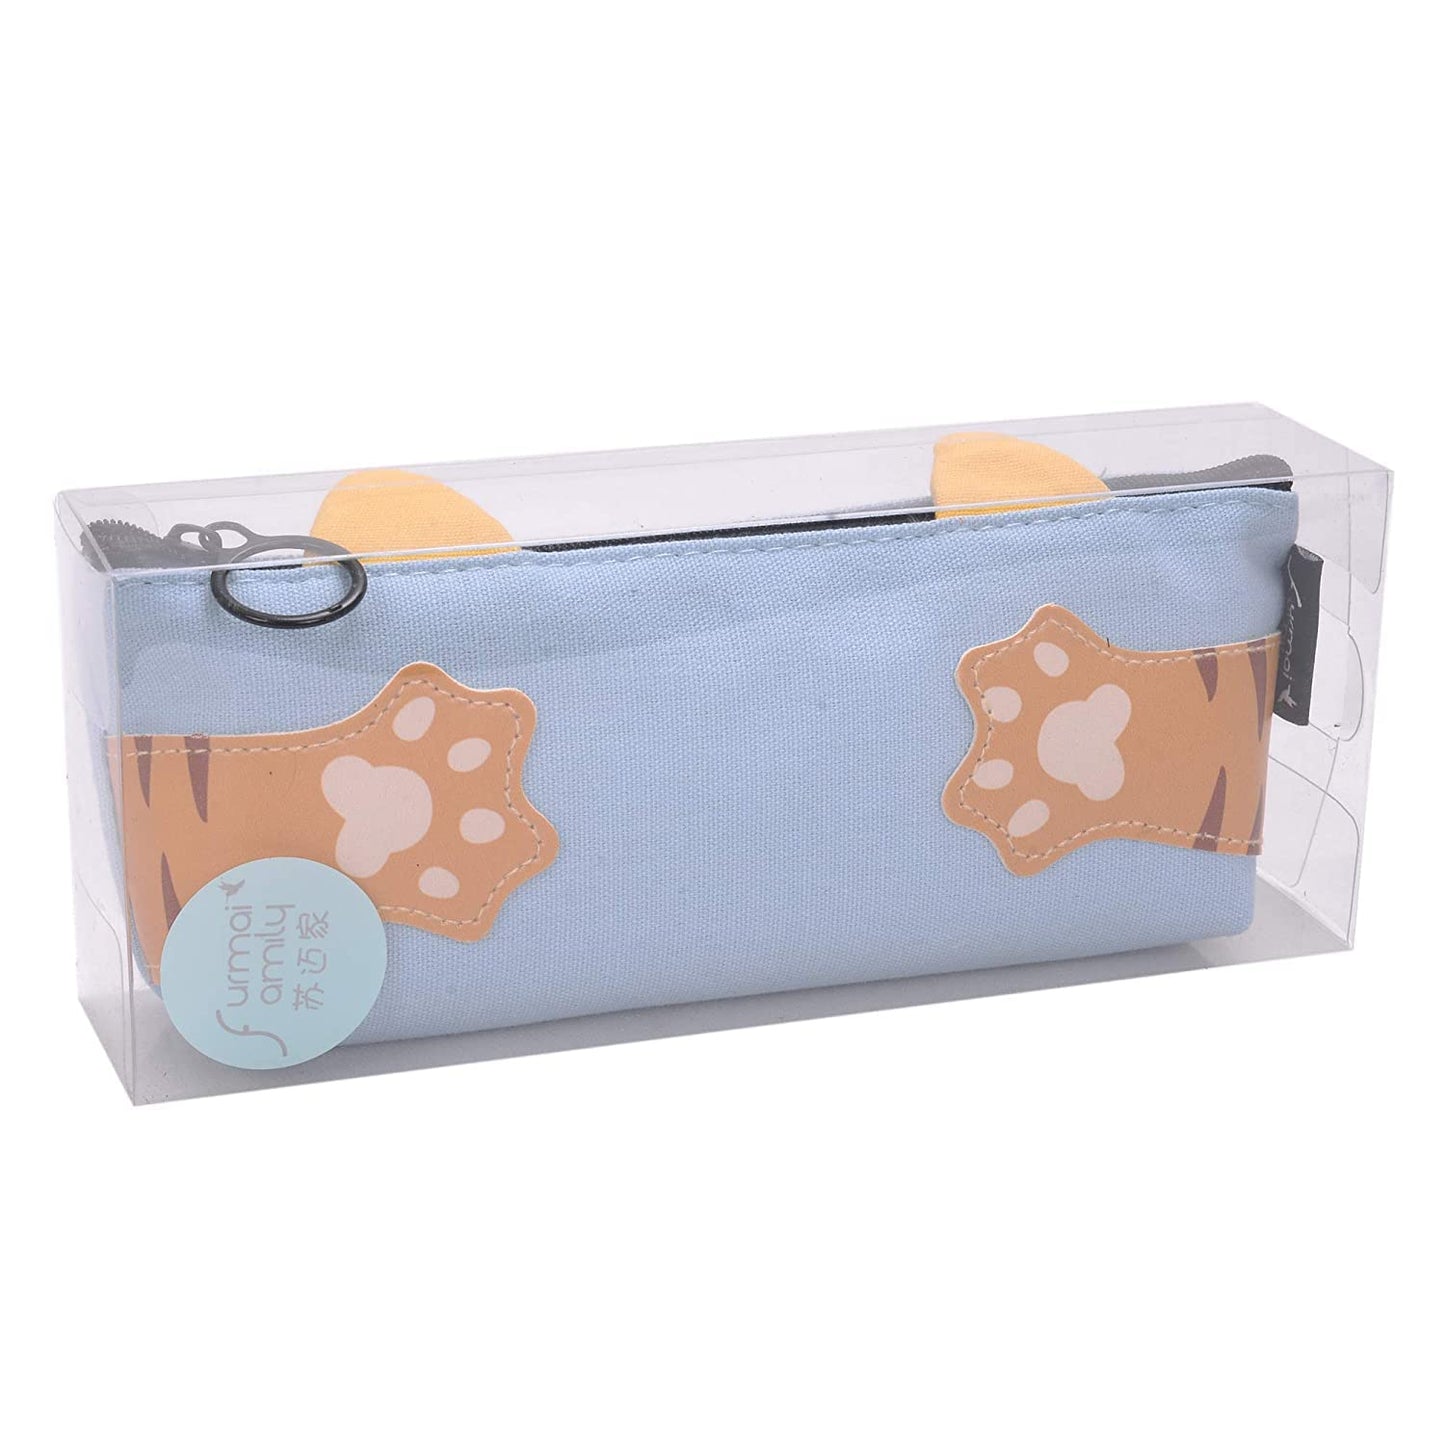 Ondesk Essentials Cat Hand Series Pencil Pouch | Large Pencil Pen Case with Zipper Closure | Student School Supplies | Office Stationery Pen Storage Bag | Blue Cat, Pack Of 1